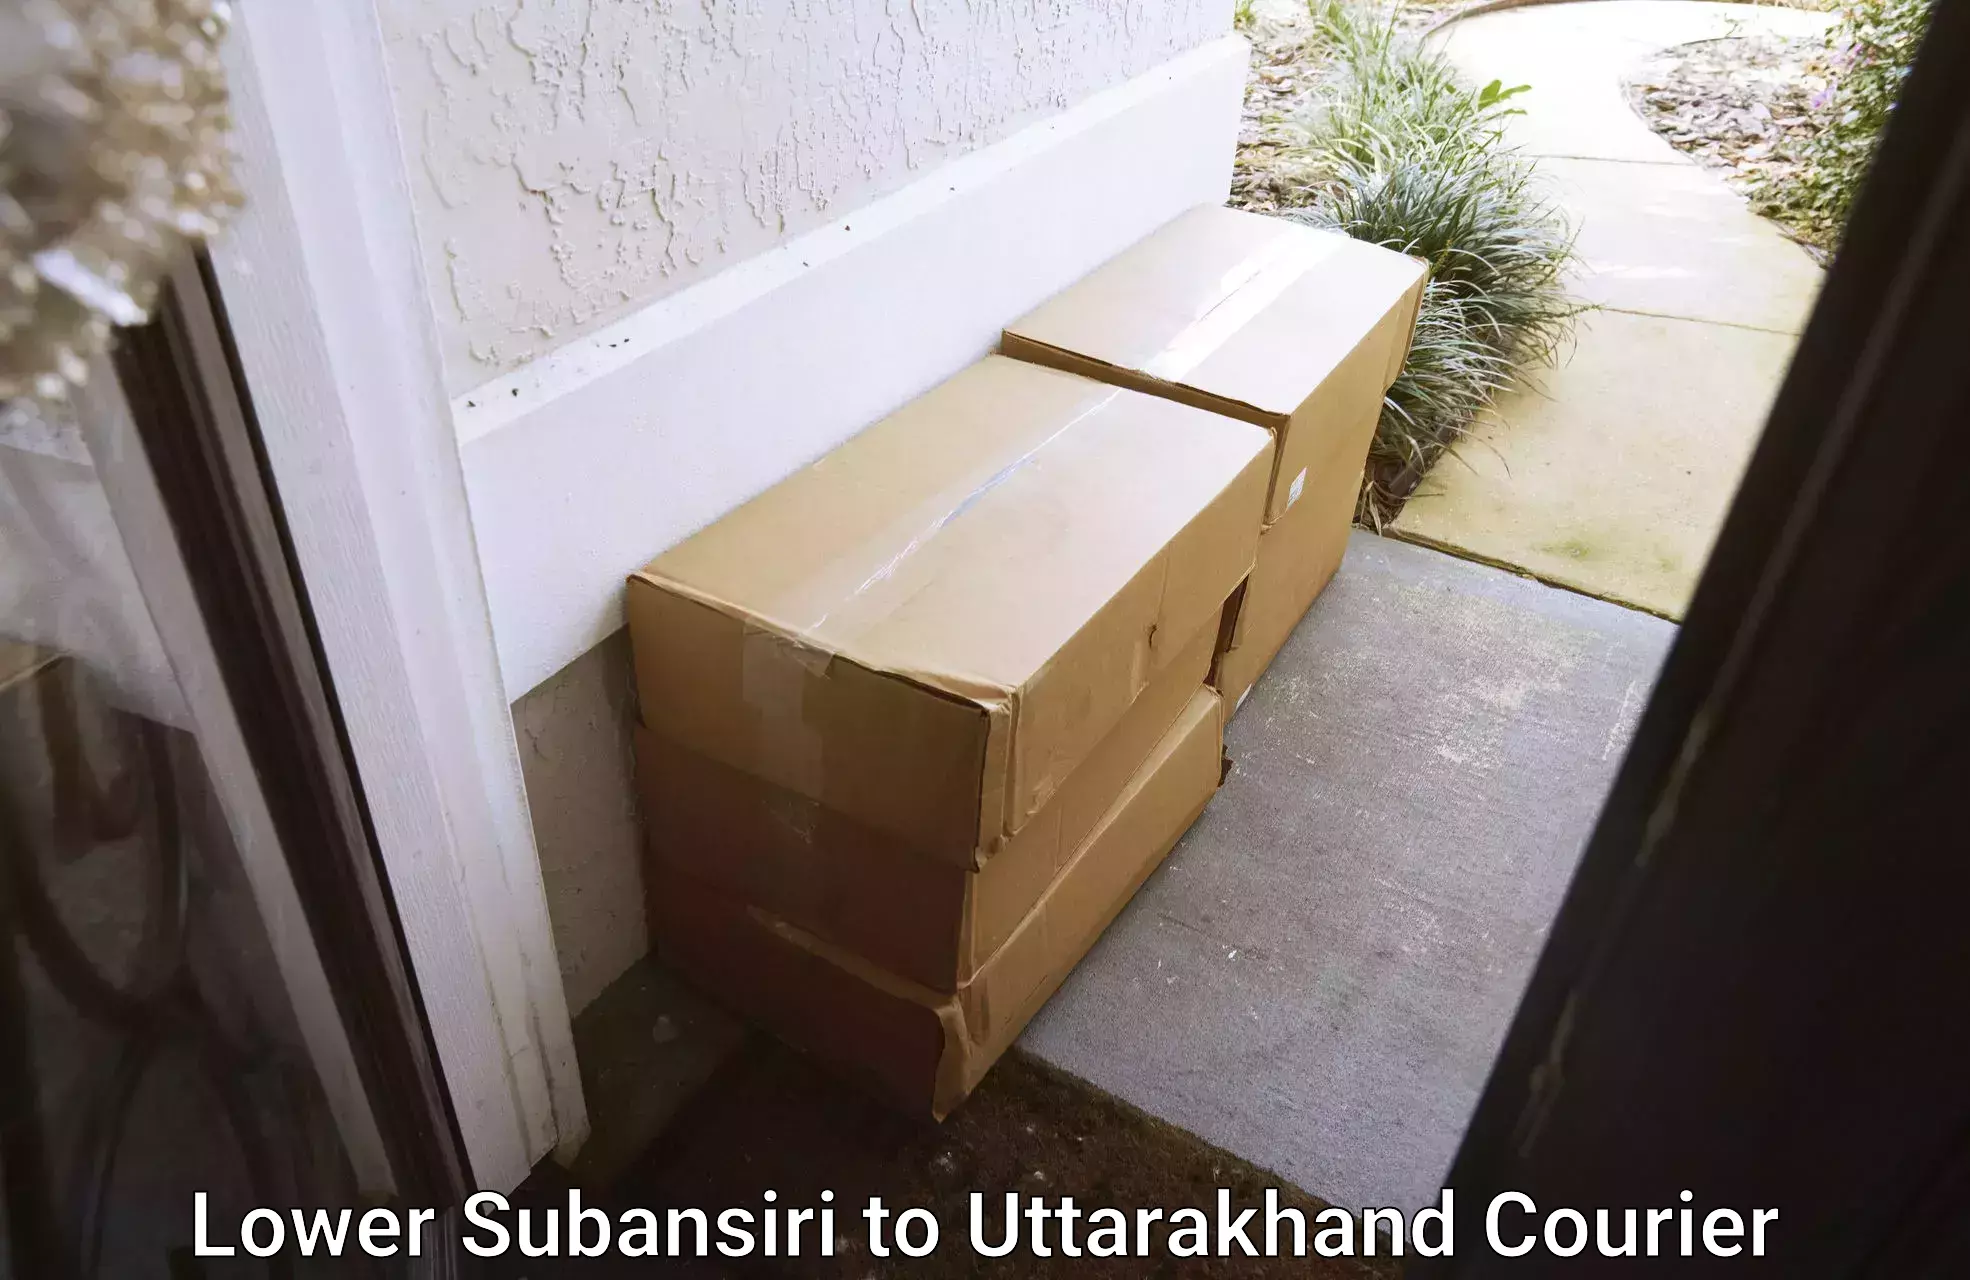 International courier networks in Lower Subansiri to Almora